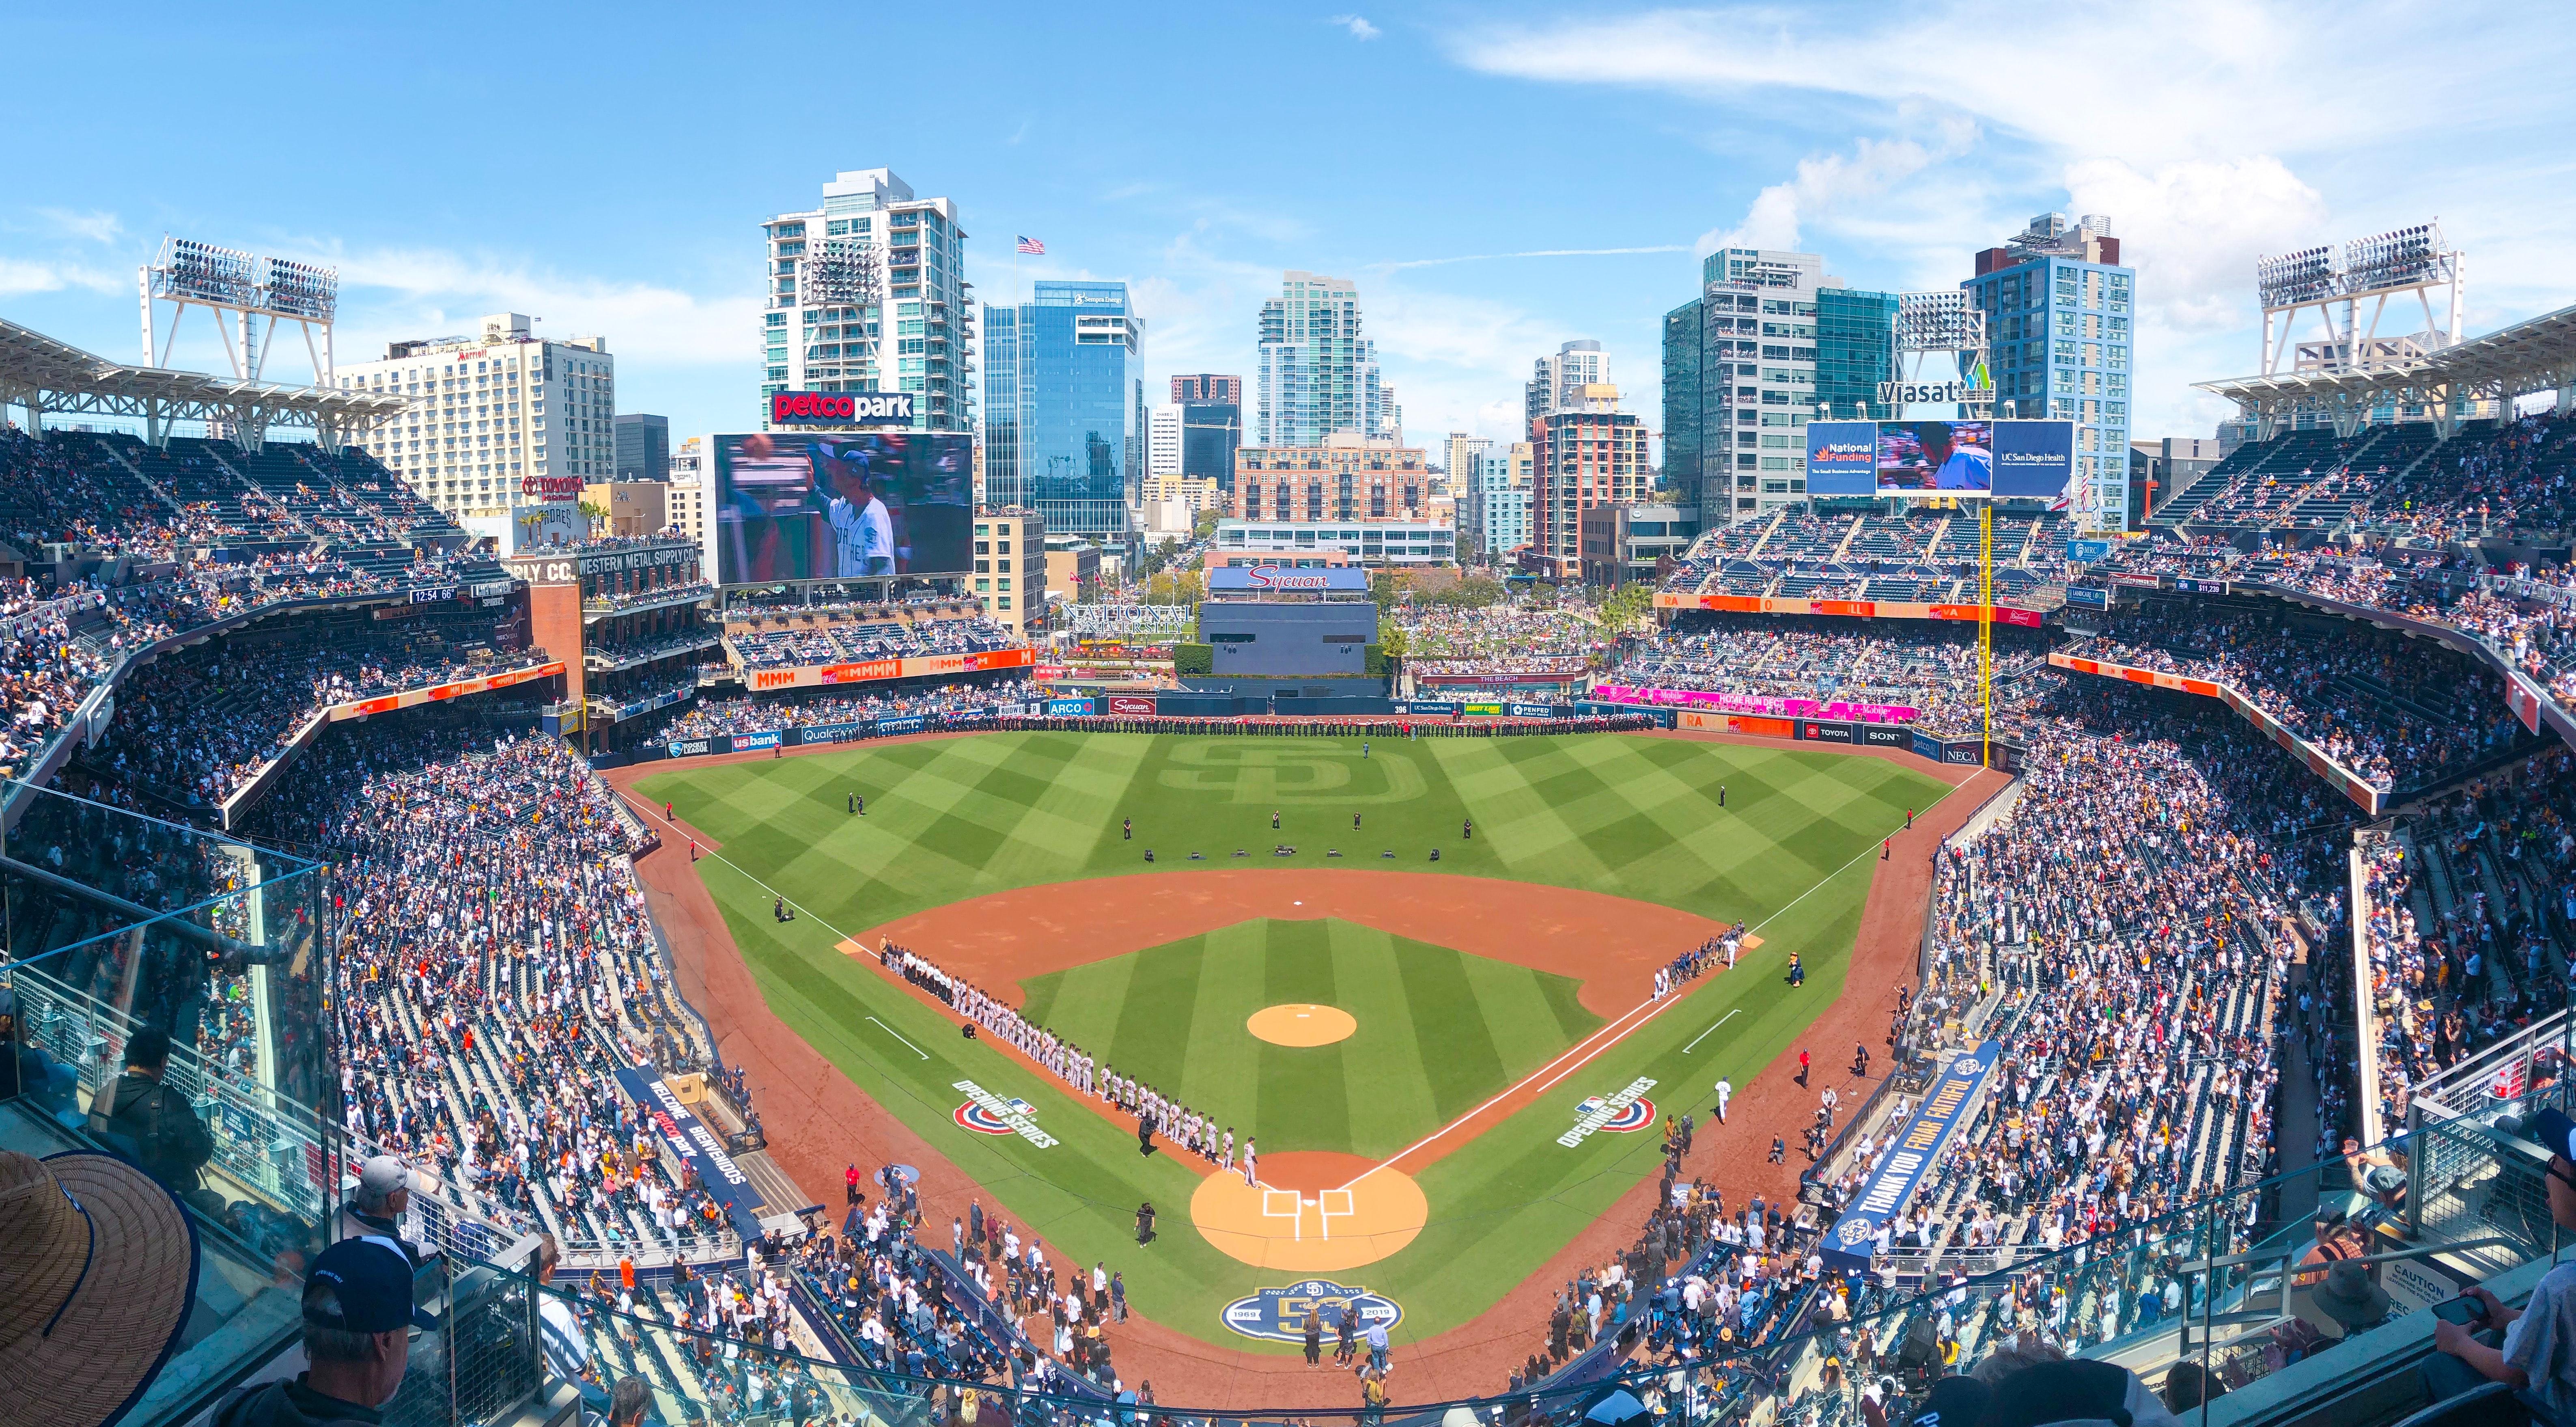 USA Today names Petco Park the best MLB ballpark in 2022 